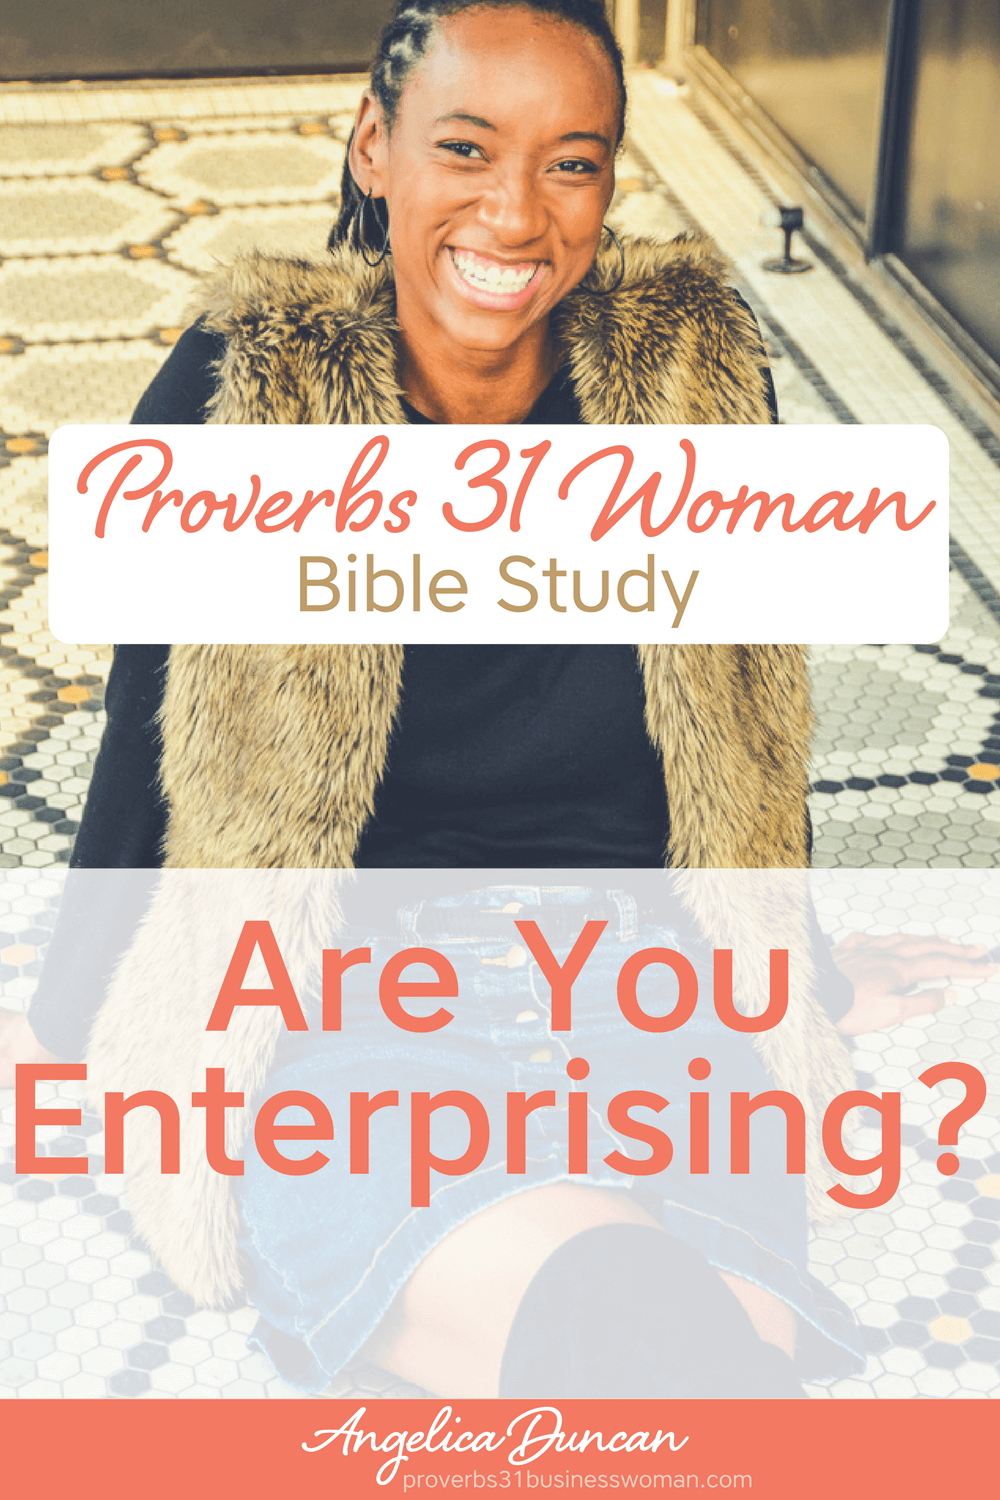 Are there ways you could enterprising for your family? Find out how to have godly priorities and build a business in our Proverbs 31 Woman Bible Study! #p31 #proverbs31woman #proverbs31businesswoman #biblestudy #christianblogger #jesusgirl